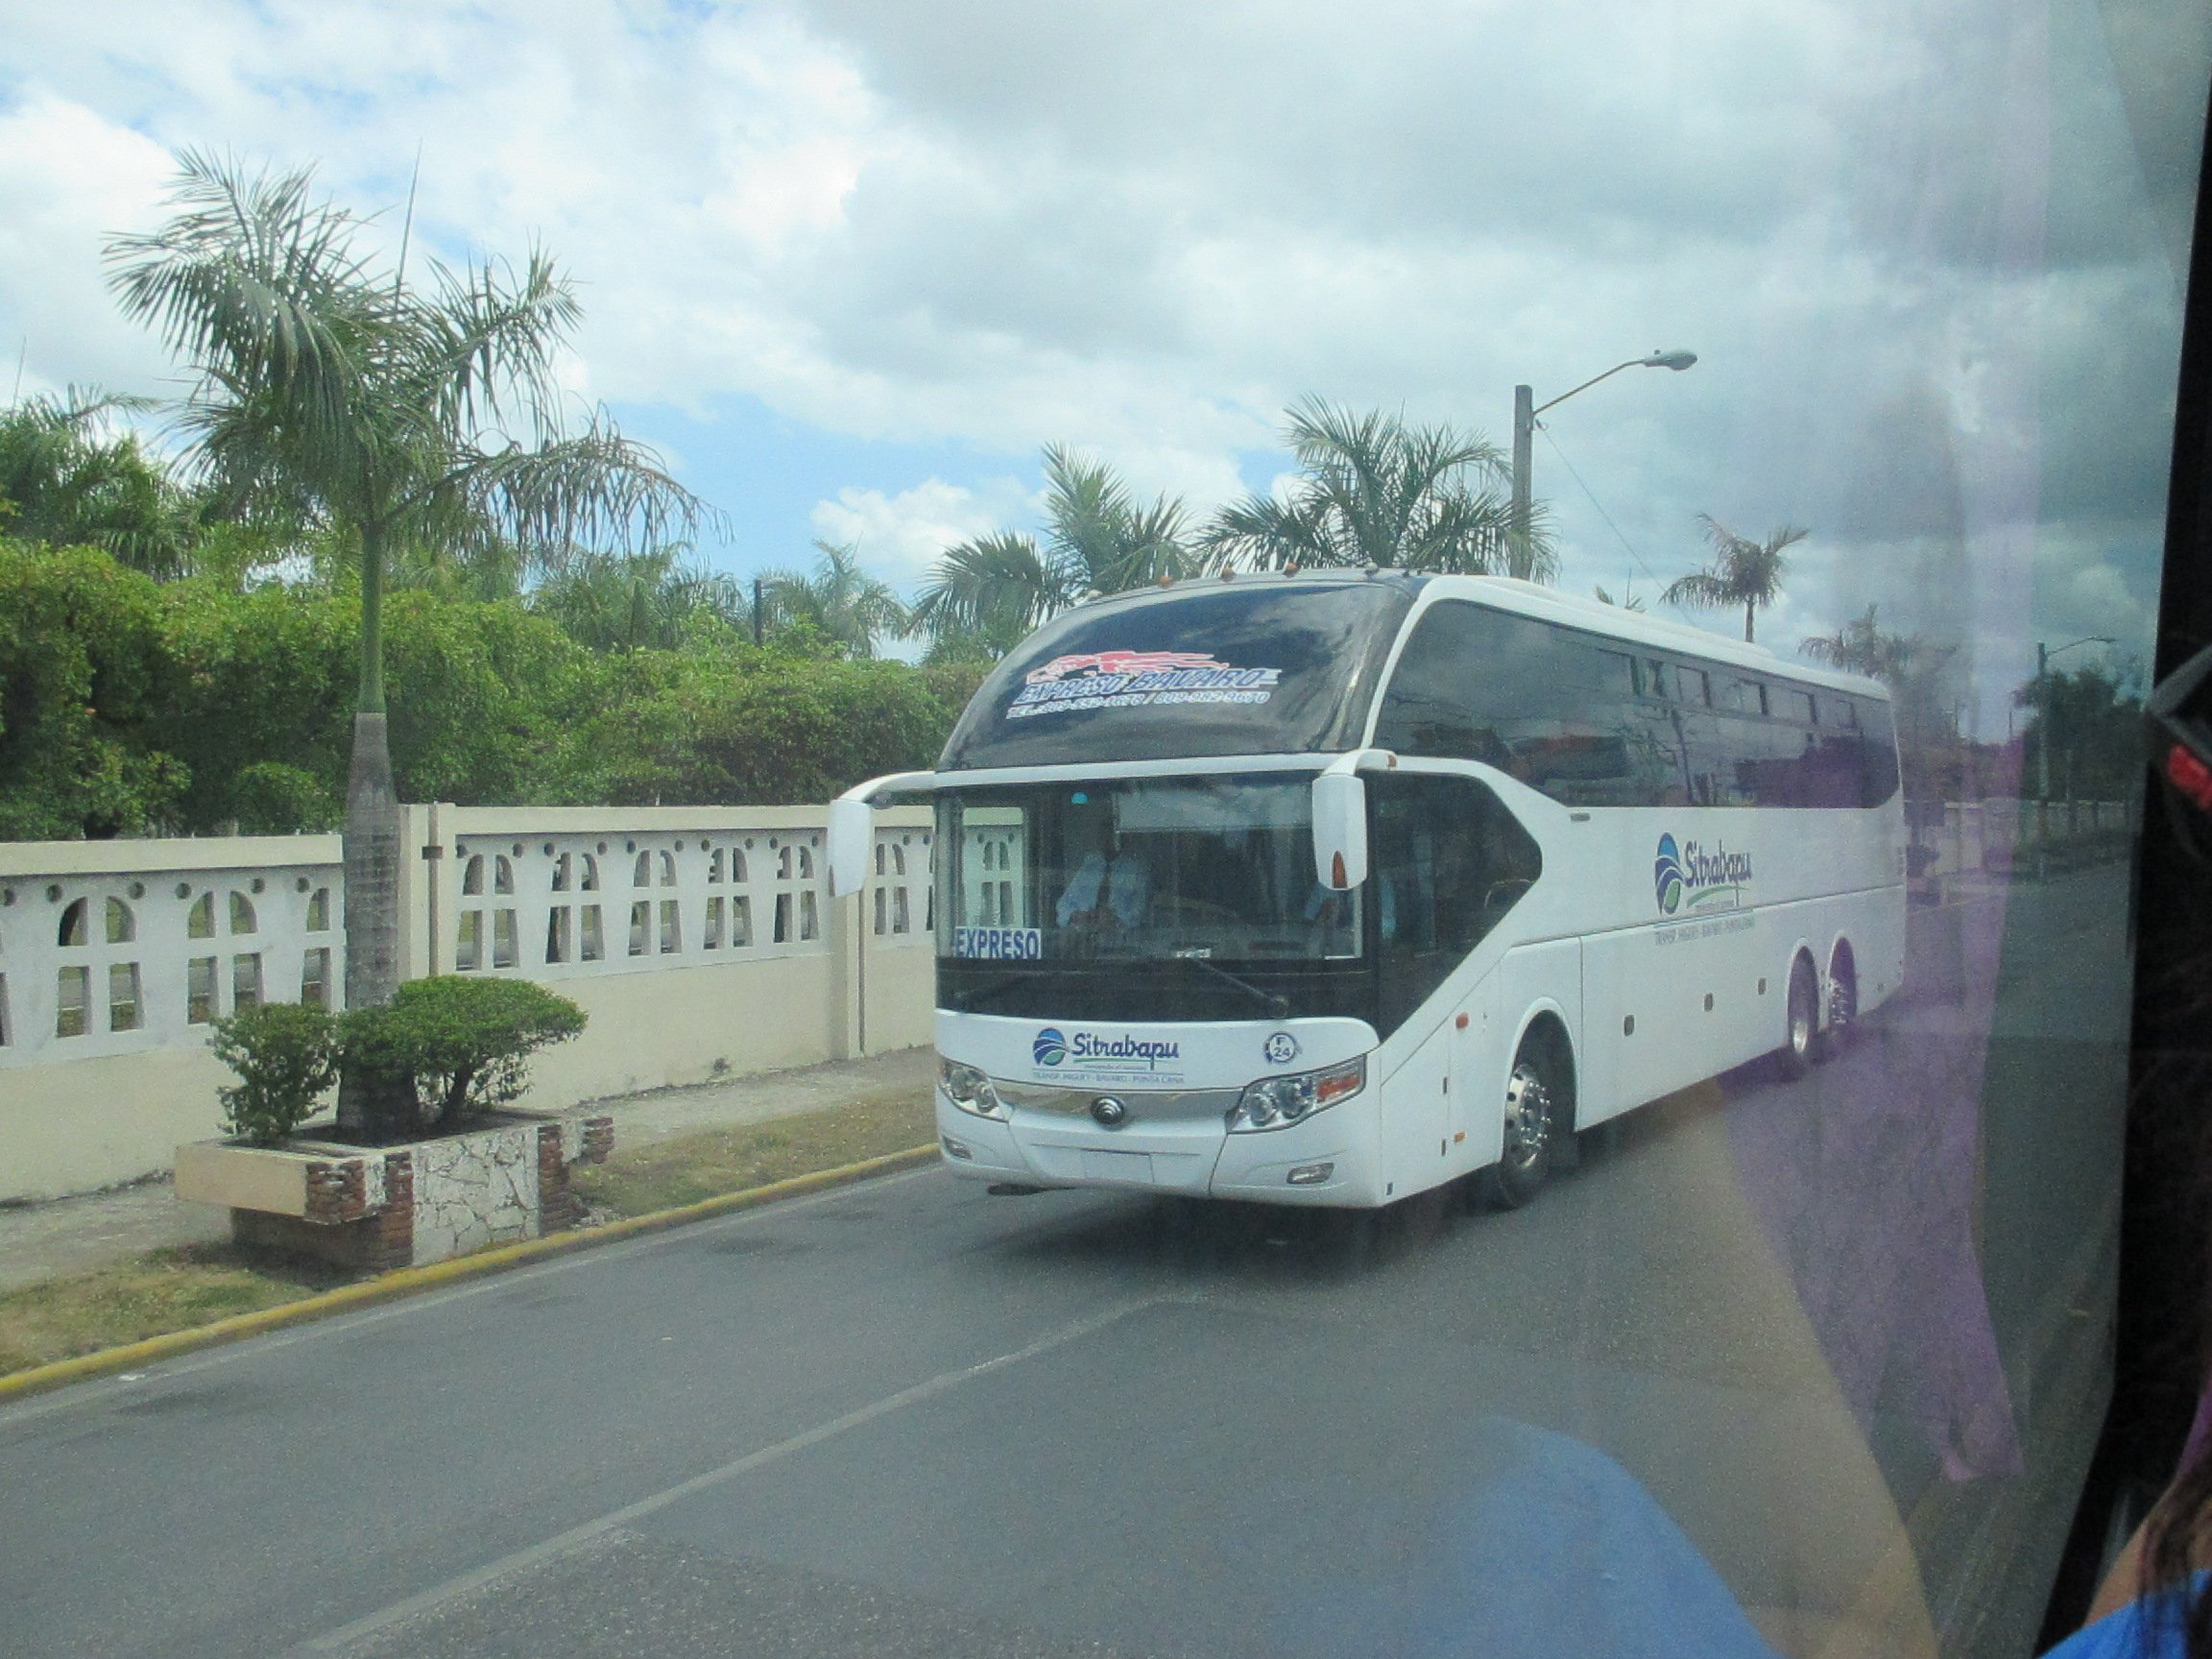 Punta Cana to La Romana, How To Get From Punta Cana Airport To La Romana - All Possible Ways, BUSES FROM PUNTA CANA AIRPORT TO BAVARO BEACH. LOCAL BUSES DOMINICAN REPUBLIC, TRAMABAPU or SITRABAPU